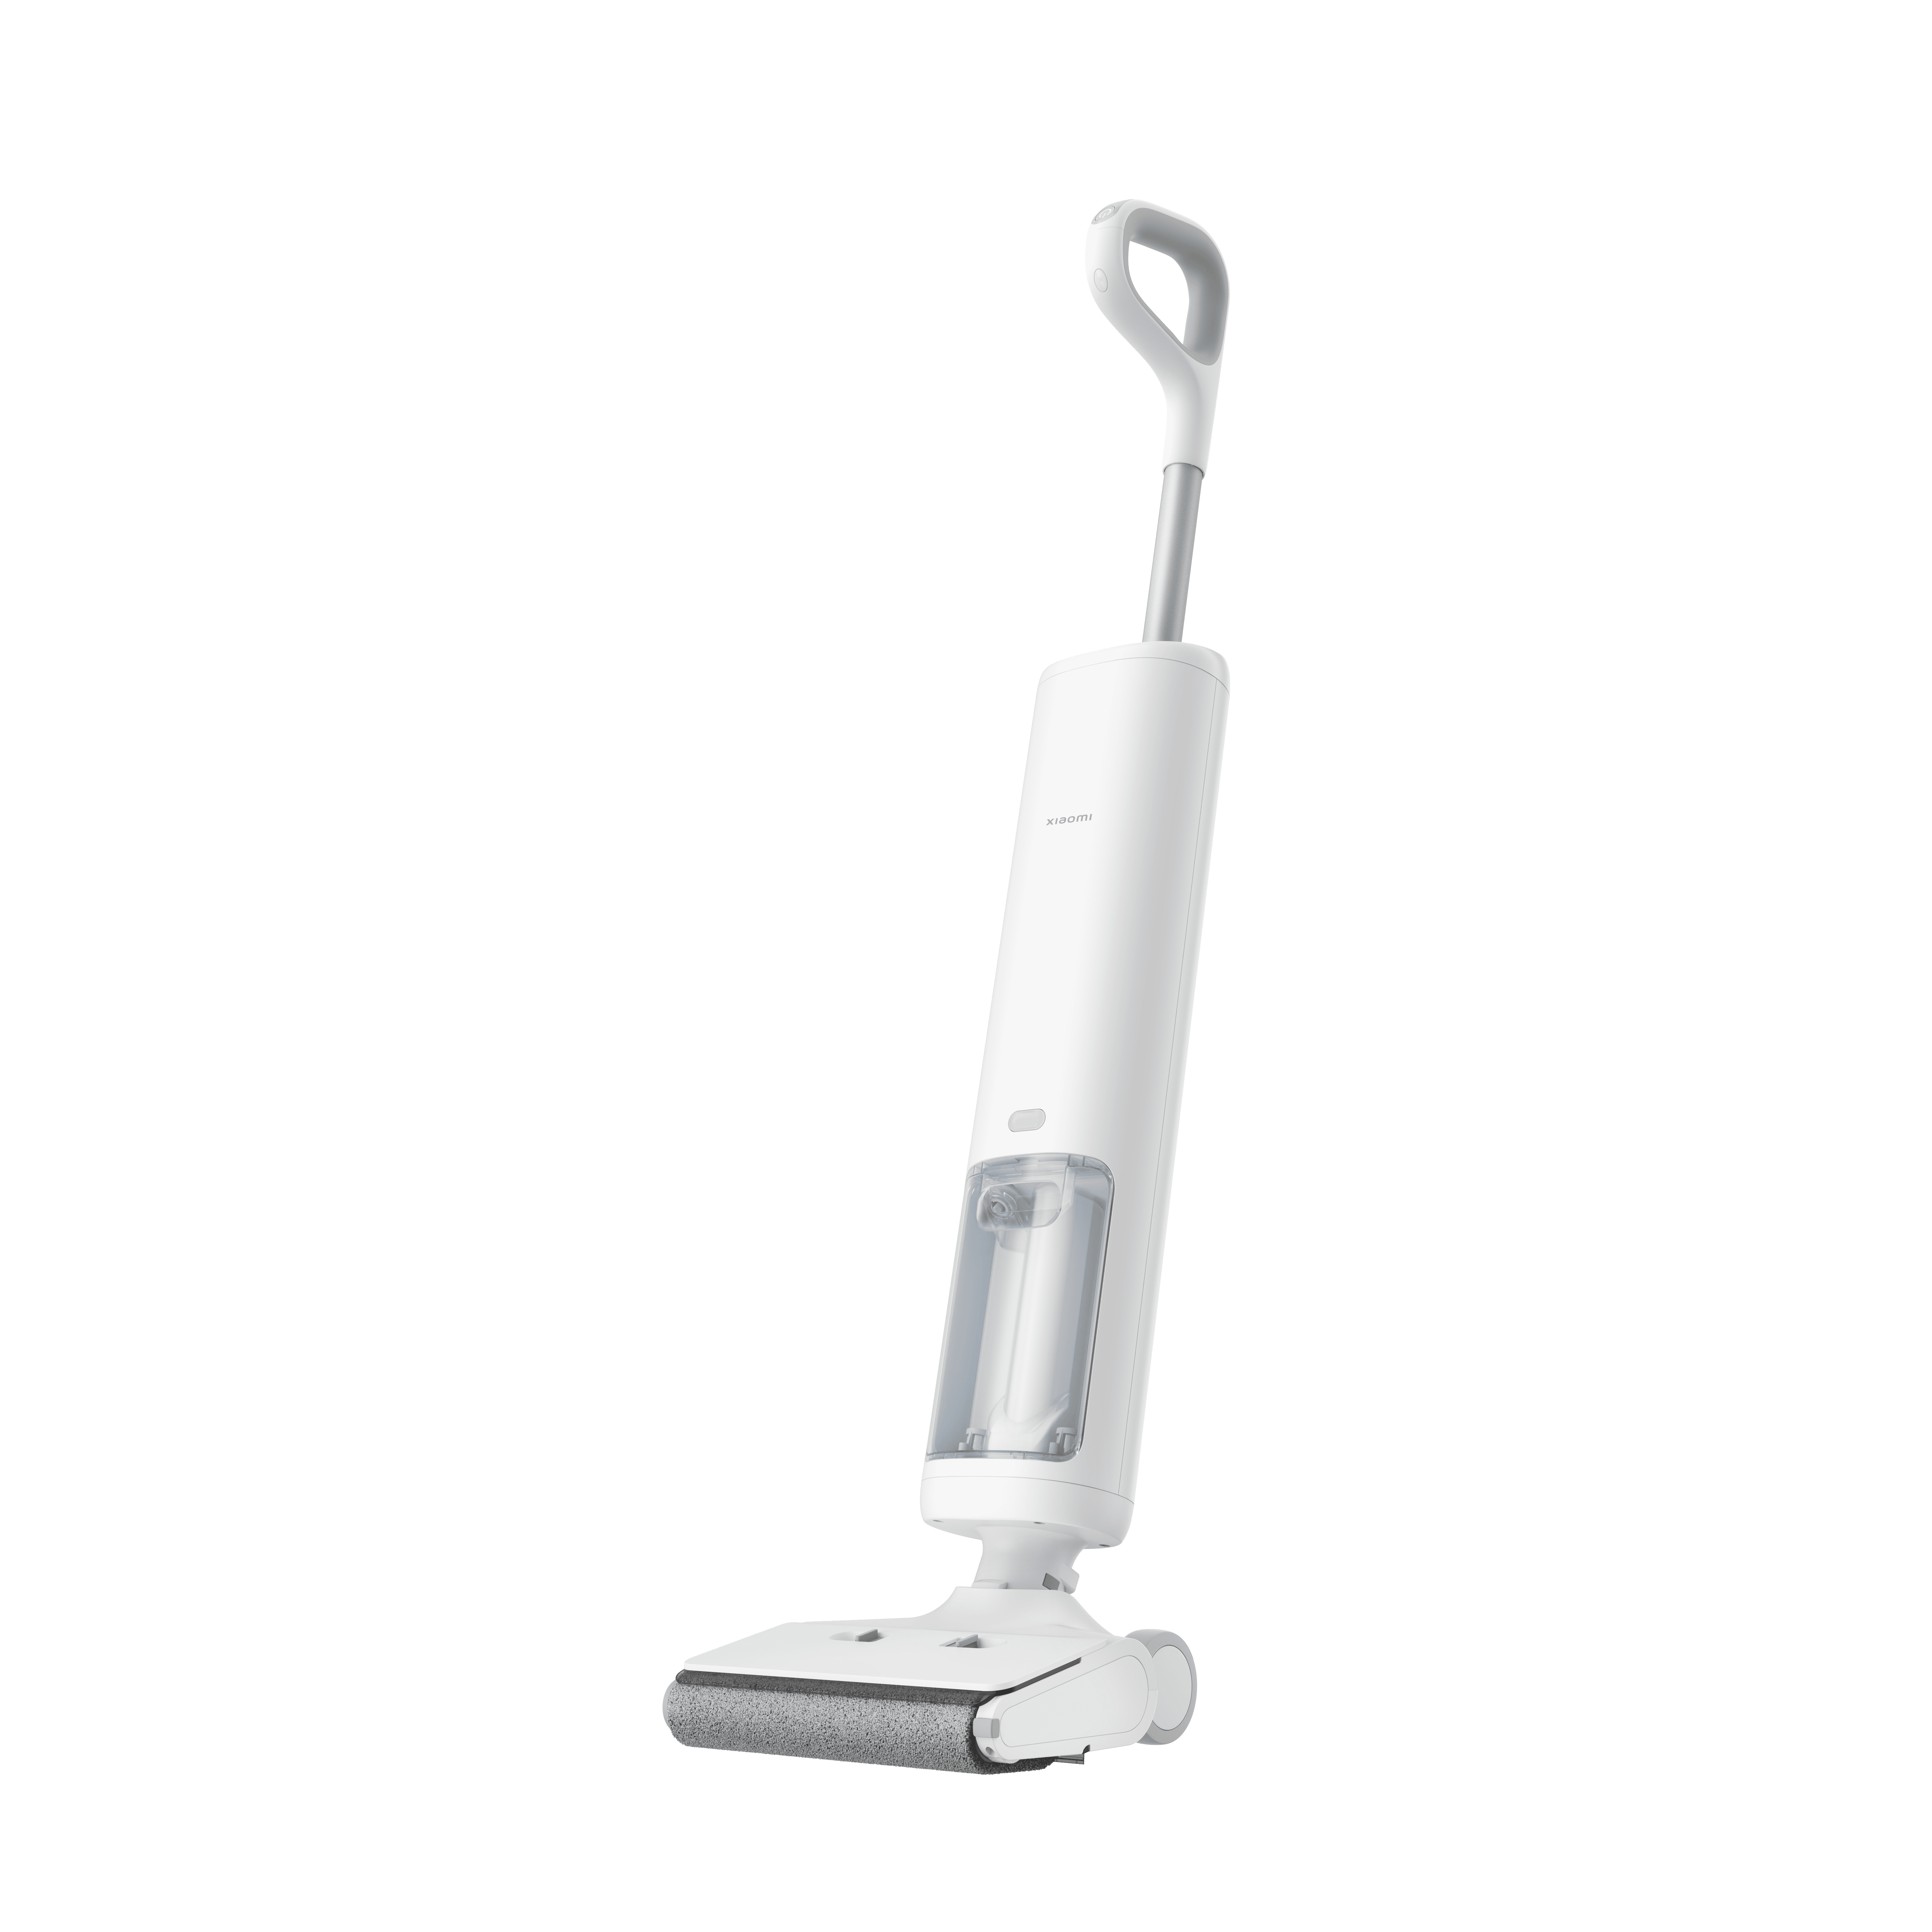 Xiaomi Truclean W10 Pro Wet Dry Vacuum, , large image number 2